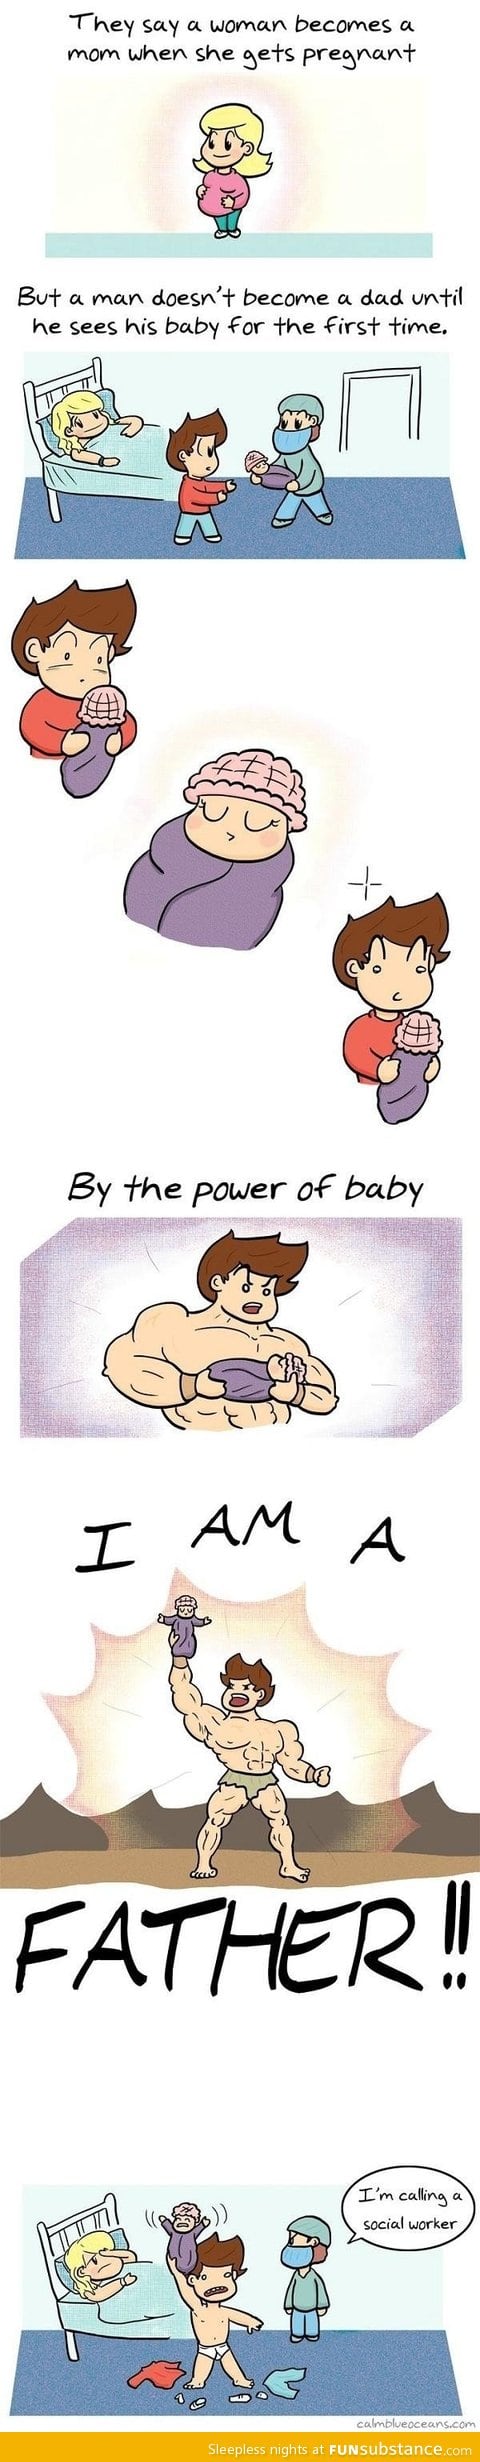 By the power of baby